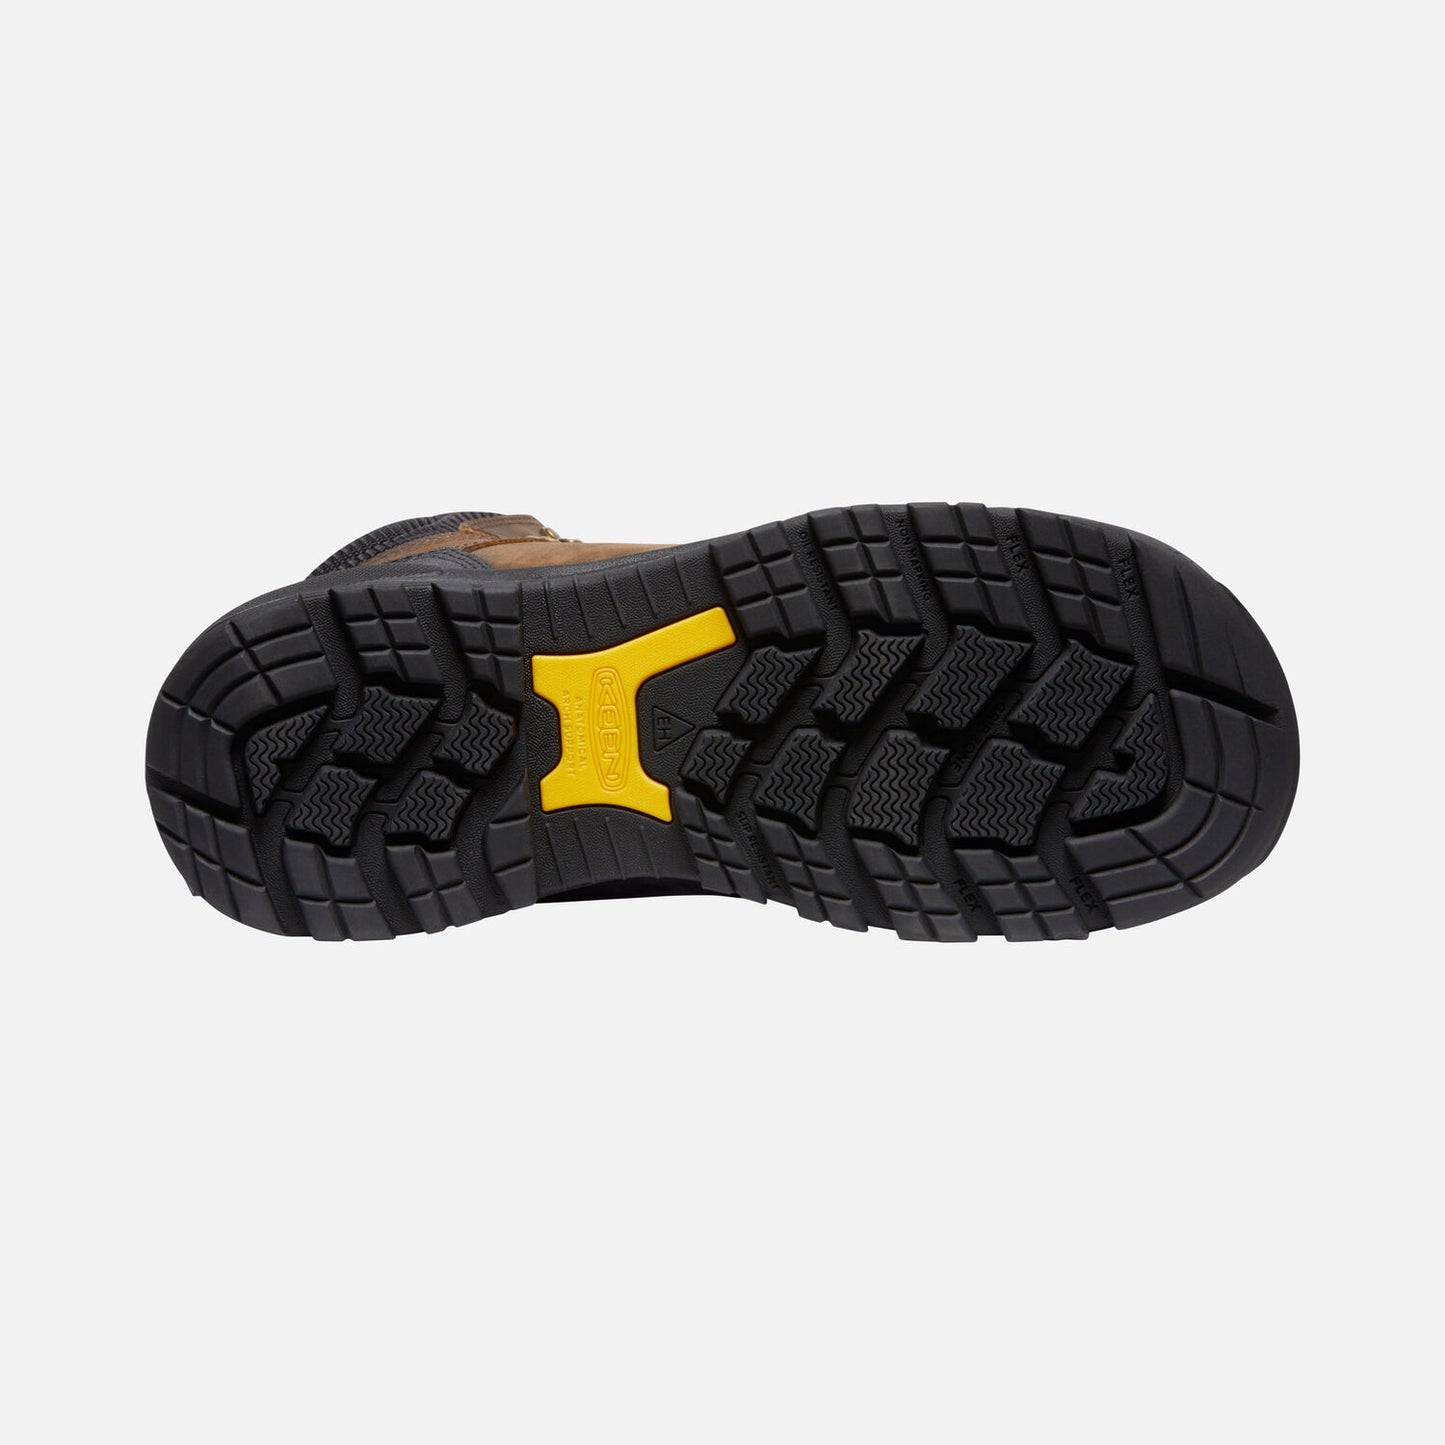 Keen Independence 8" Safety